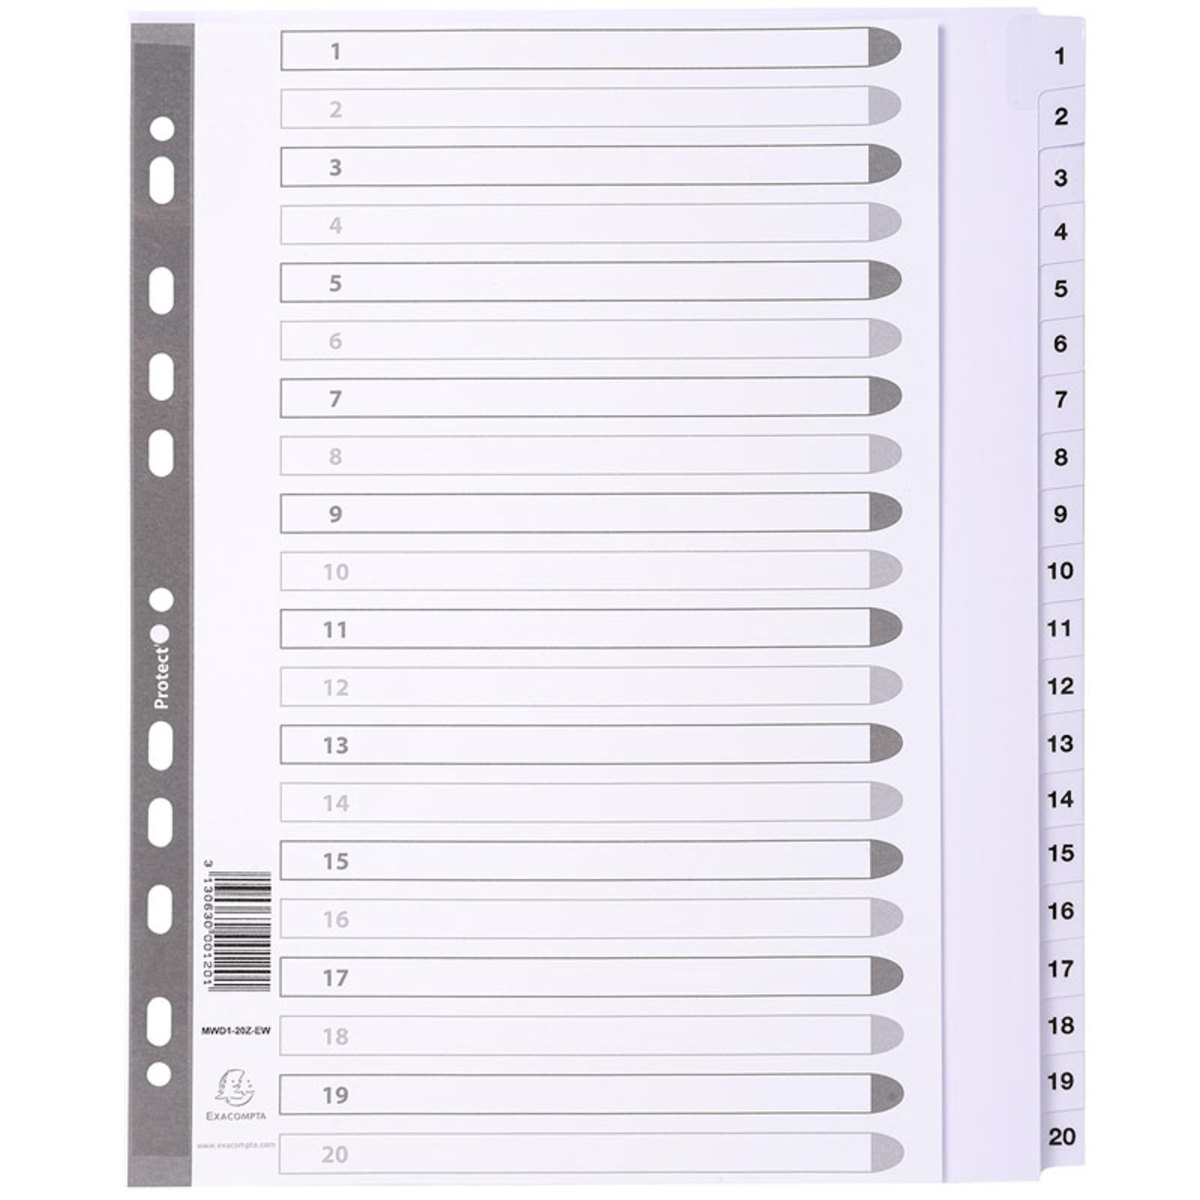 Exacompta A4 1-20 White 20 Tabs Dividers - 10 Packs of 20 Dividers